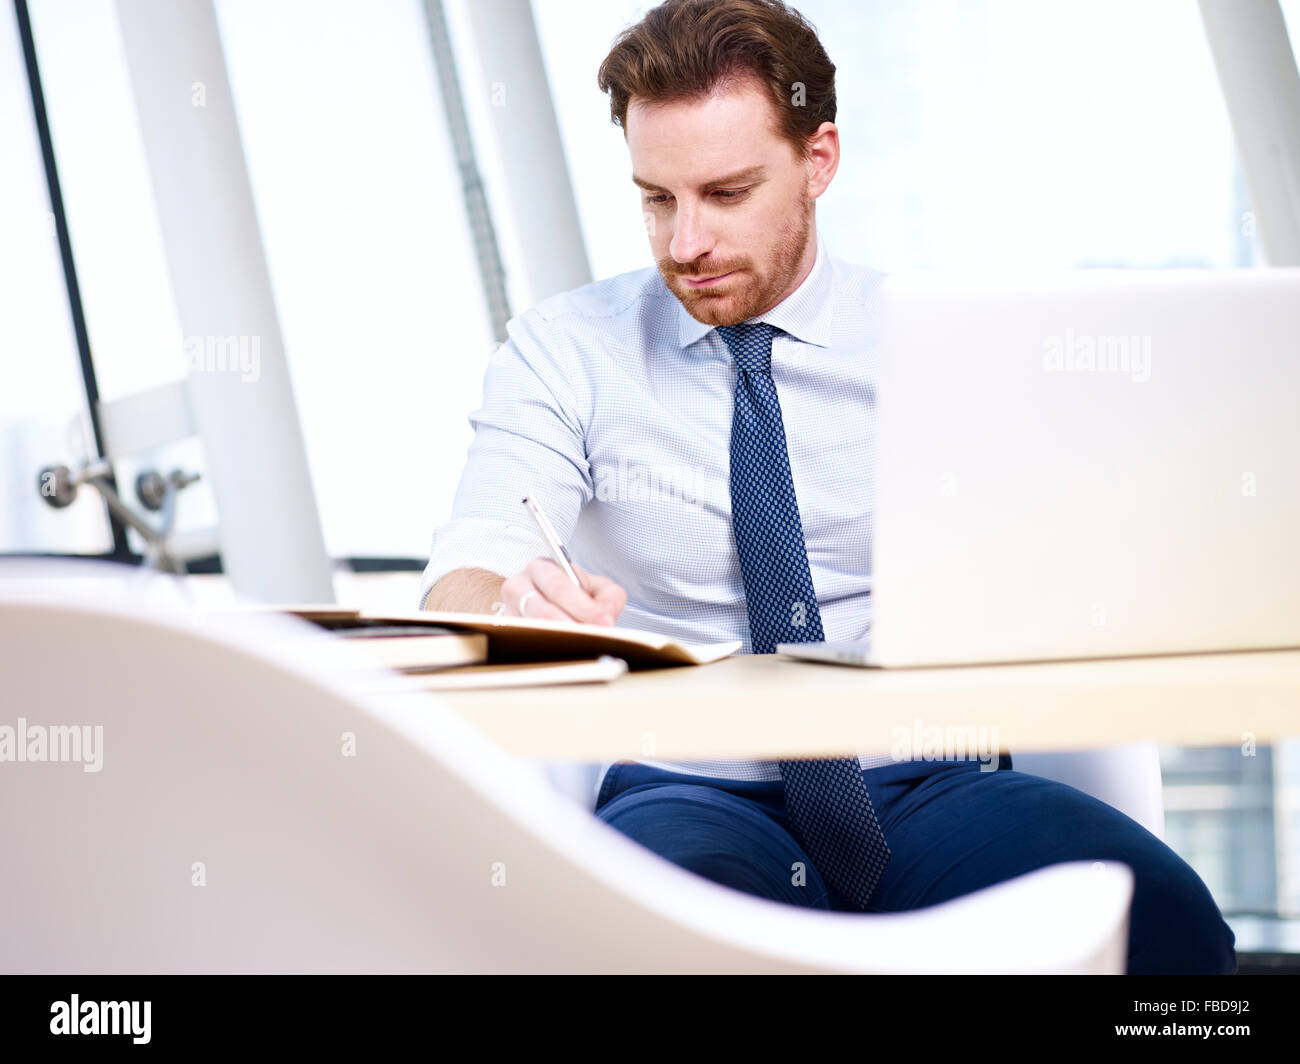 business executive working in office Stock Photo